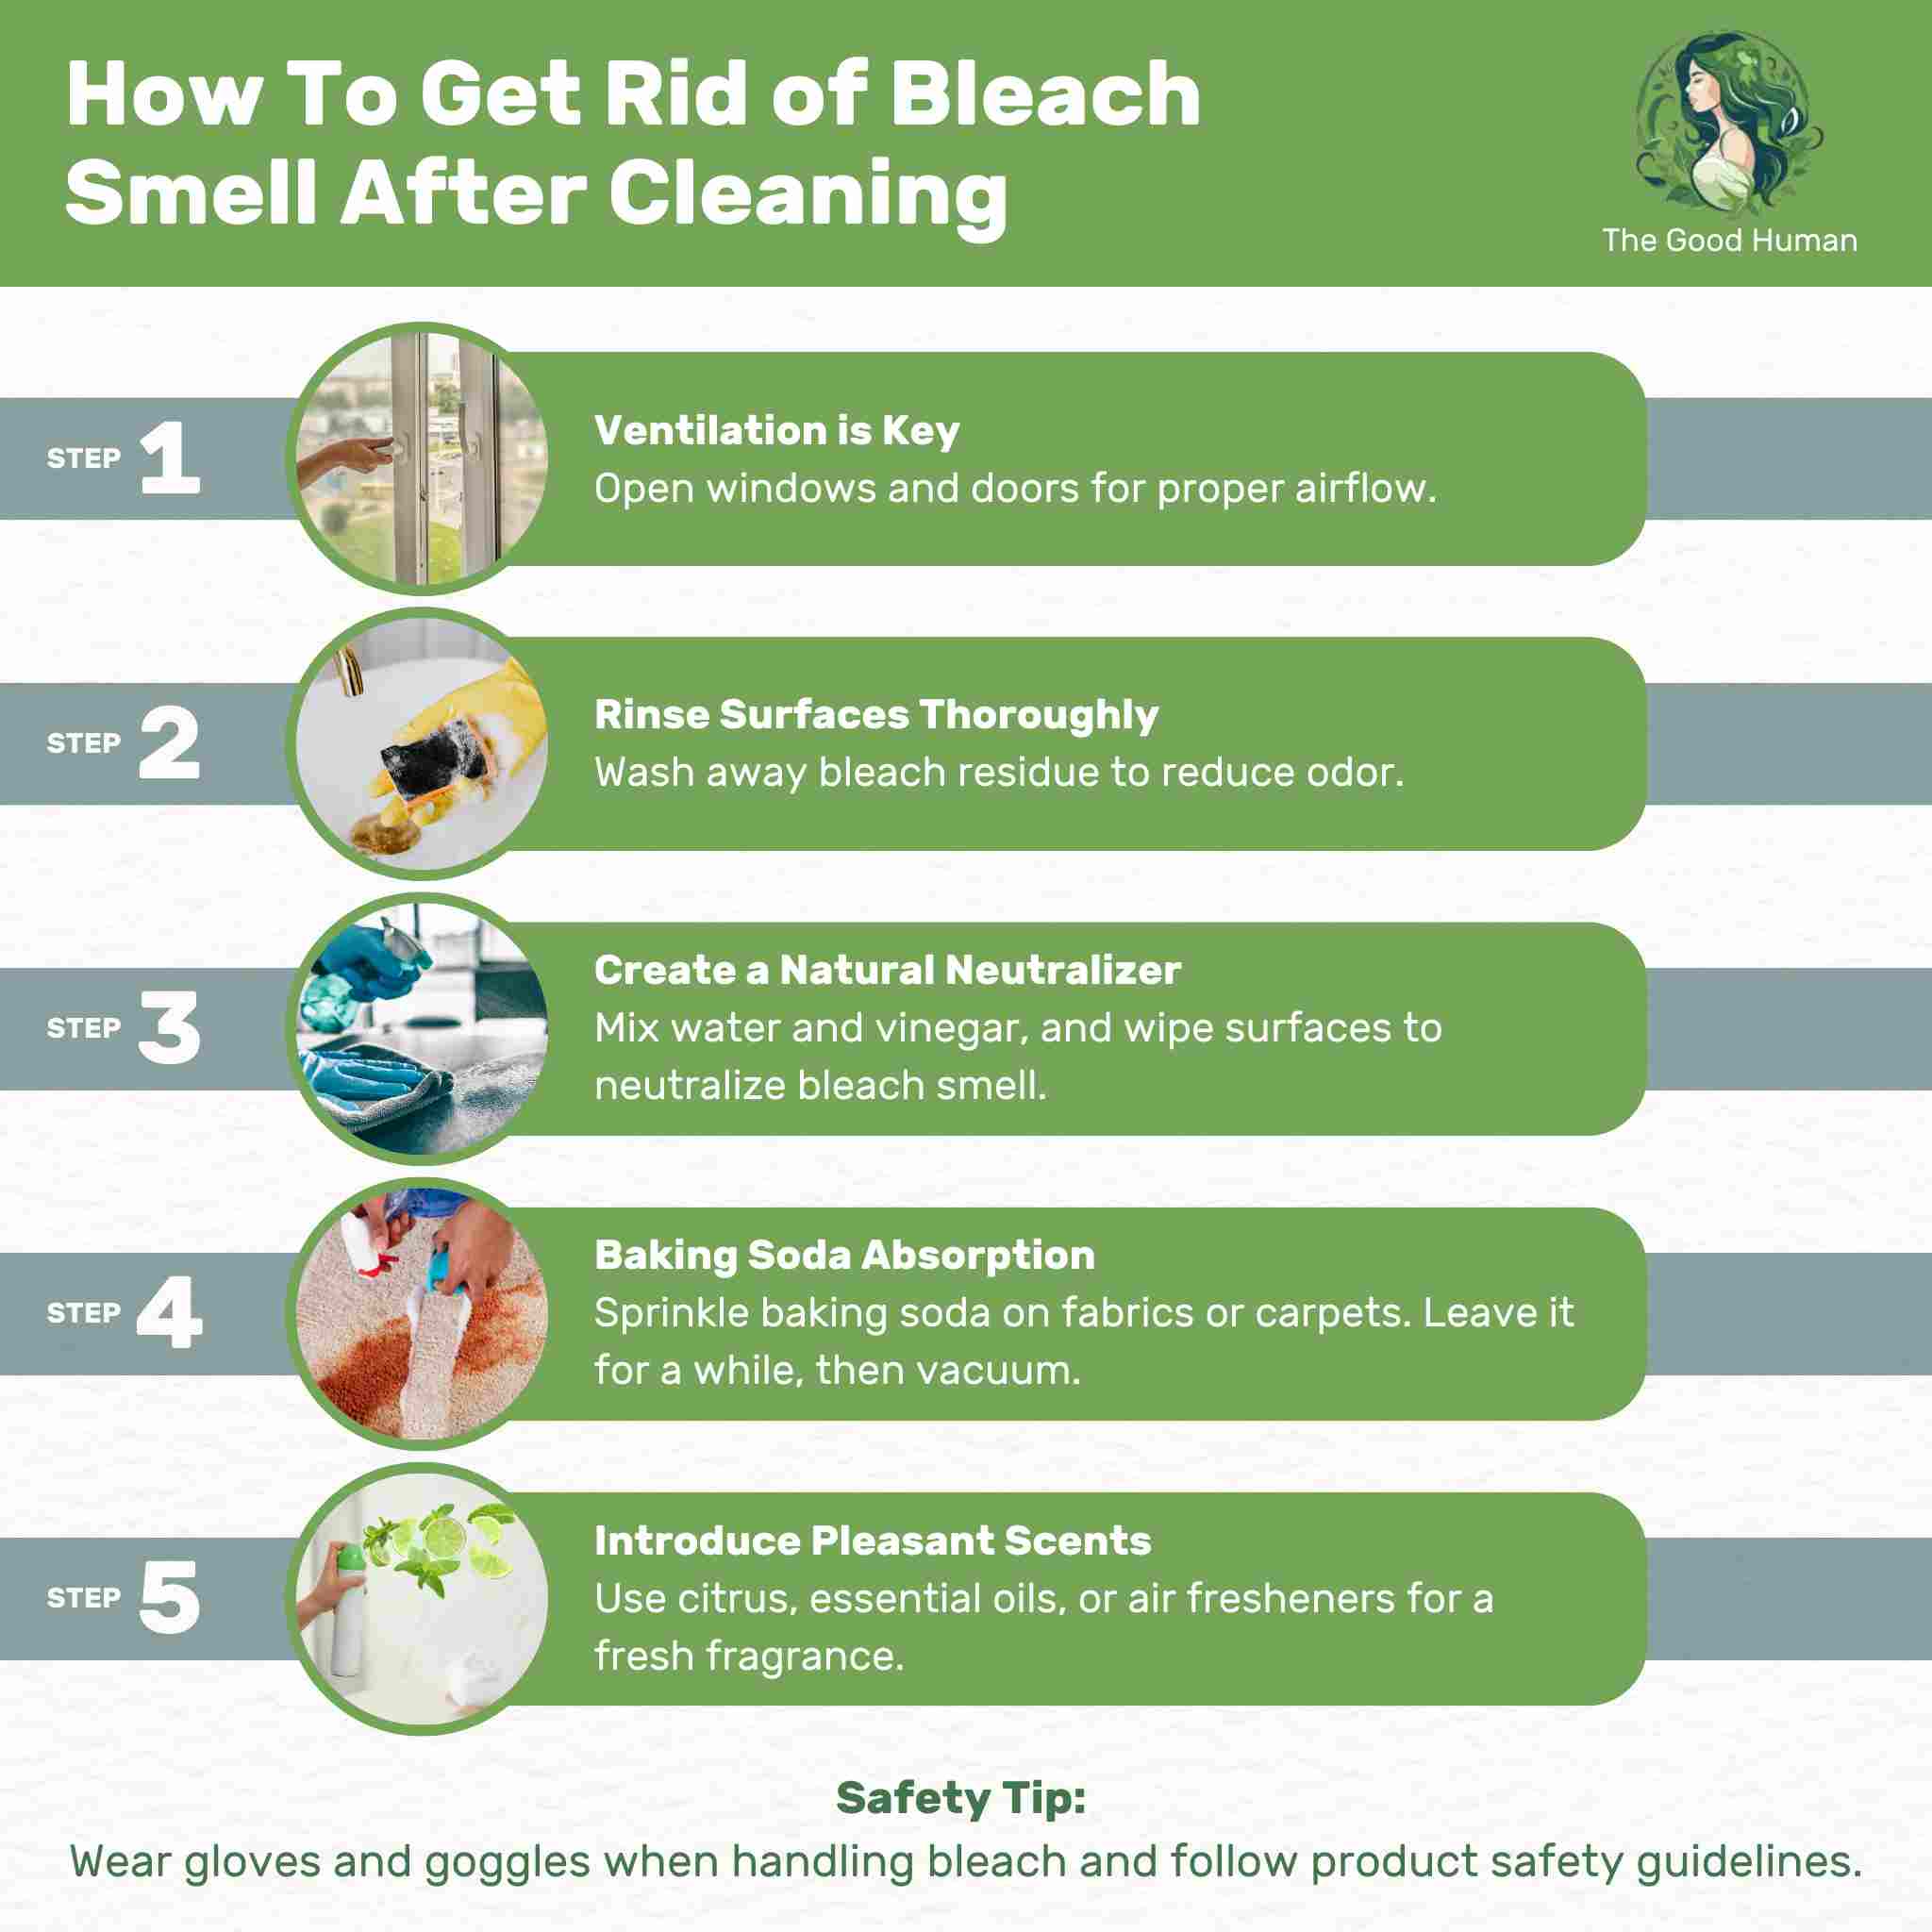 A graphic on the steps how to get rid of bleach smell after cleaning.